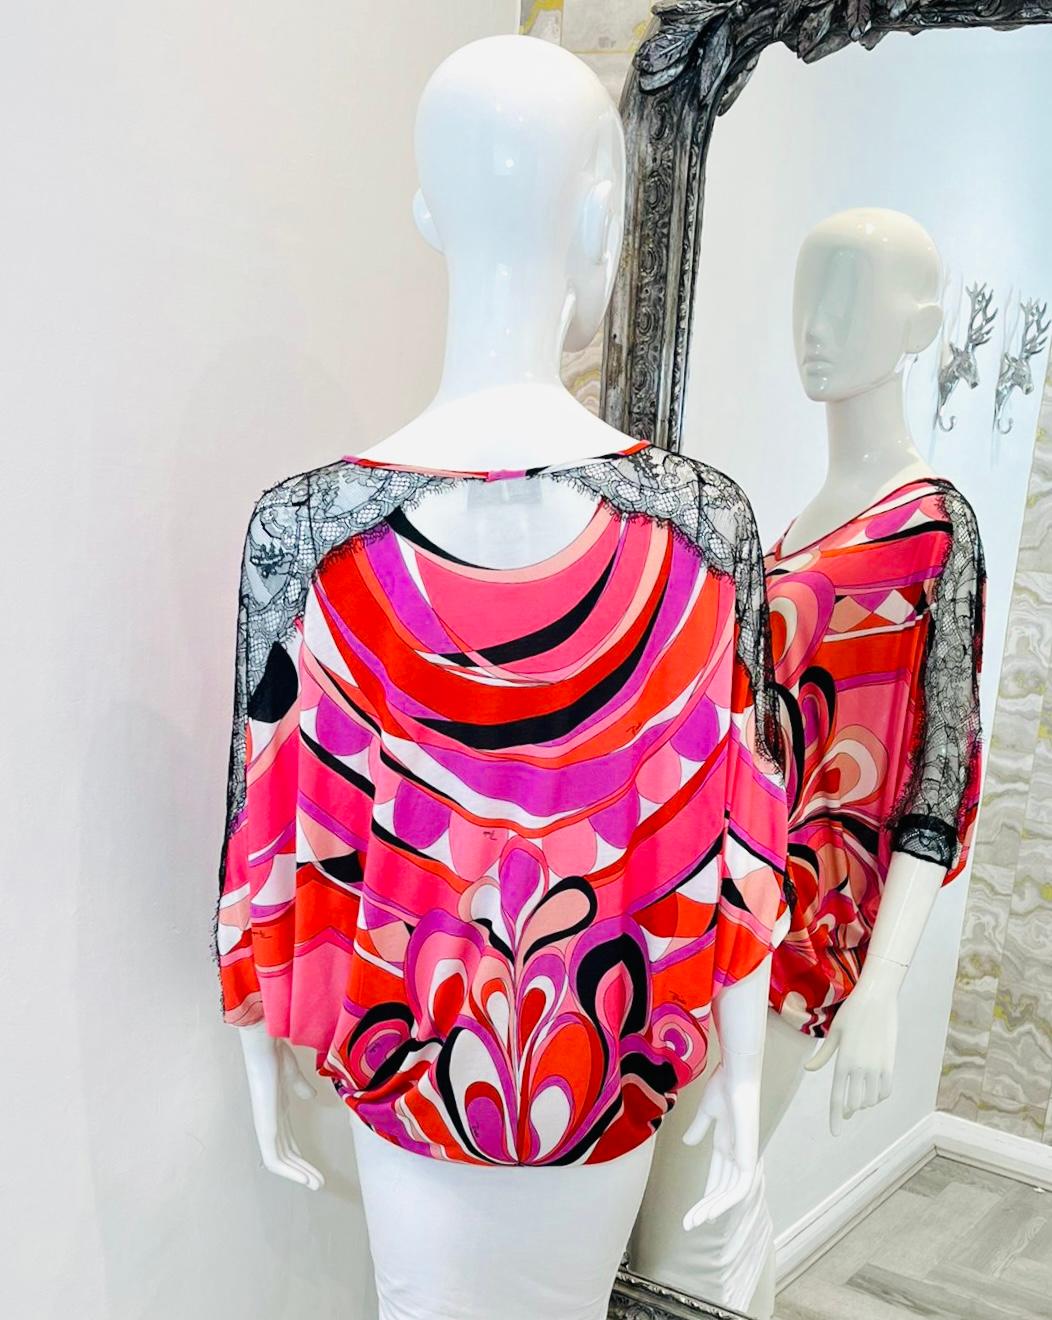 Emilio Pucci Abstract Print Blouse In Excellent Condition For Sale In London, GB